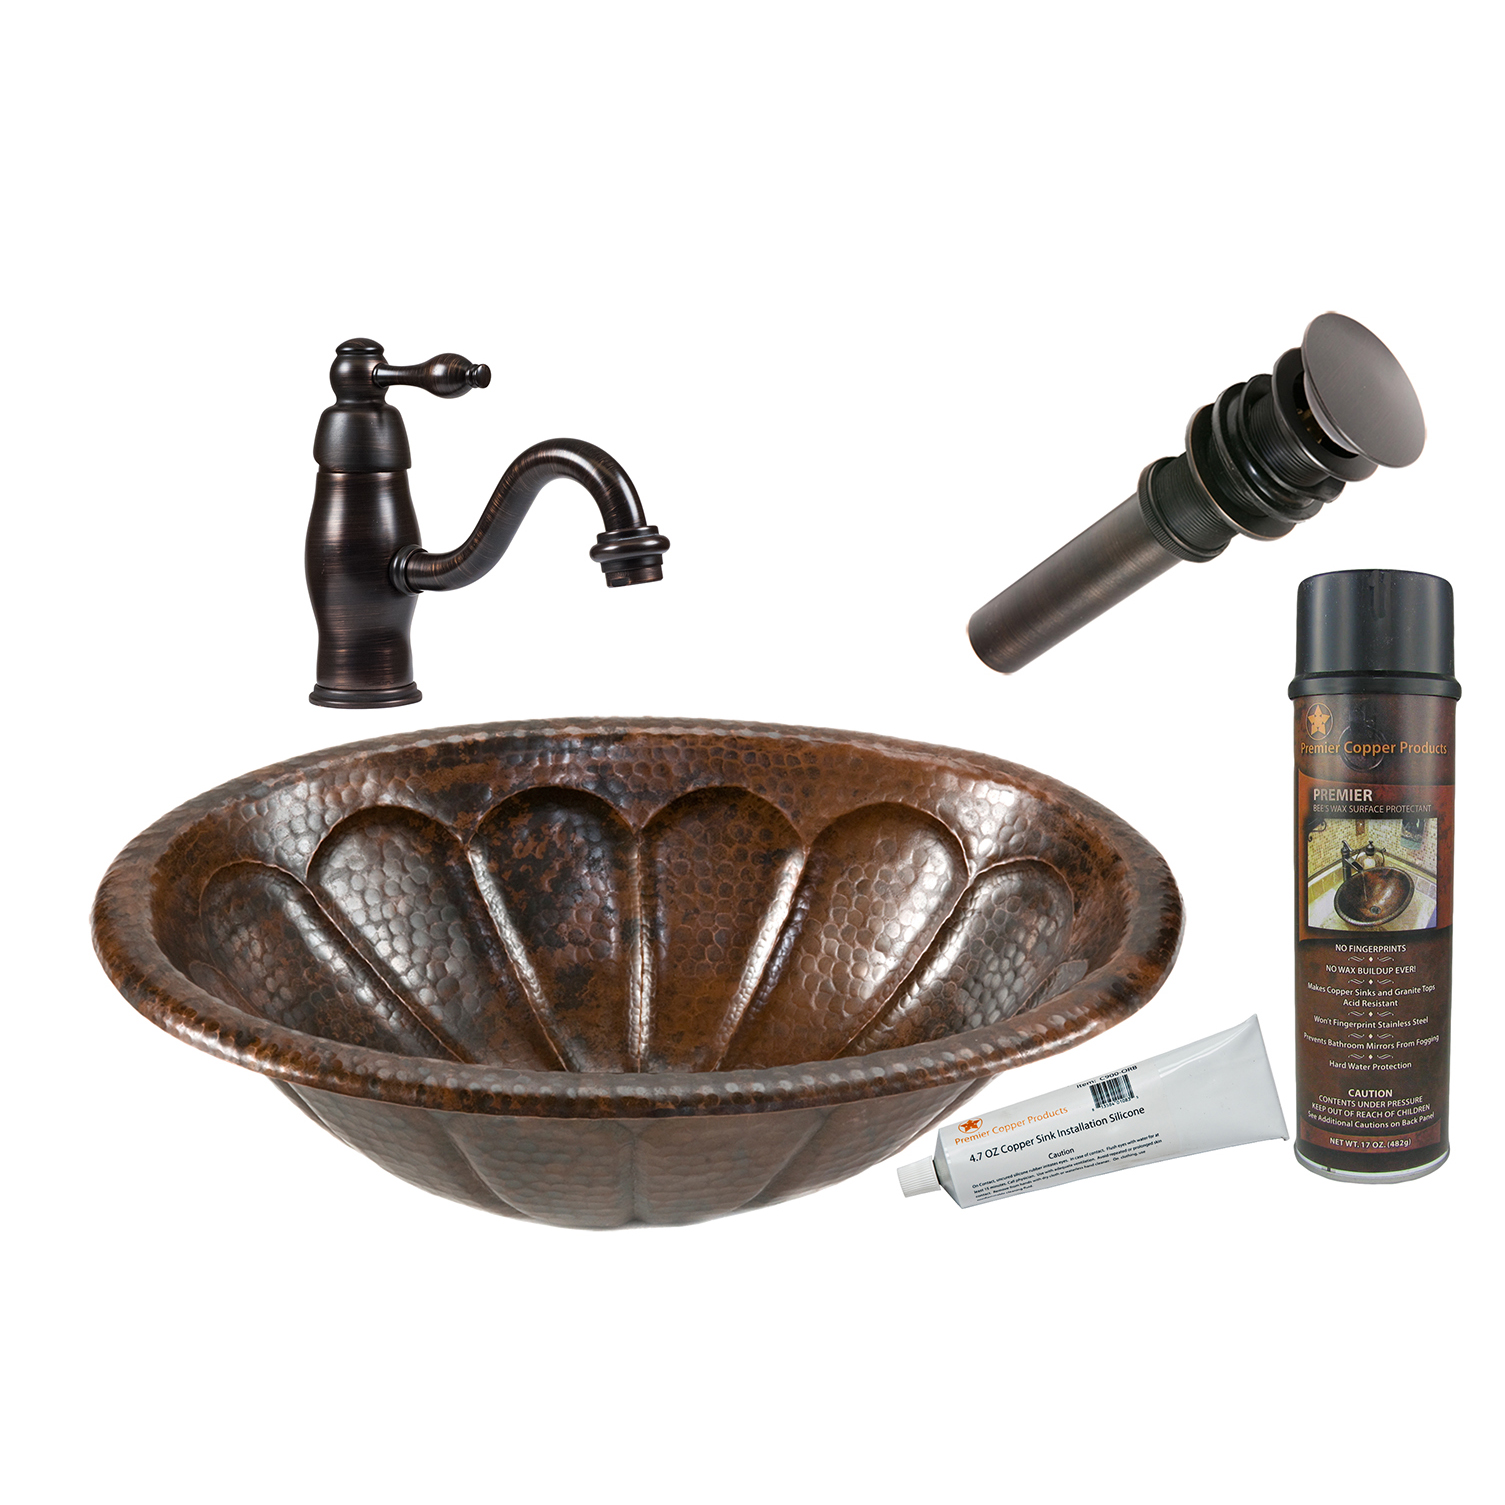 Oval Sunburst Self Rimming Hammered Copper Sink, Faucet And Accessories Package, Oil Rubbed Bronze